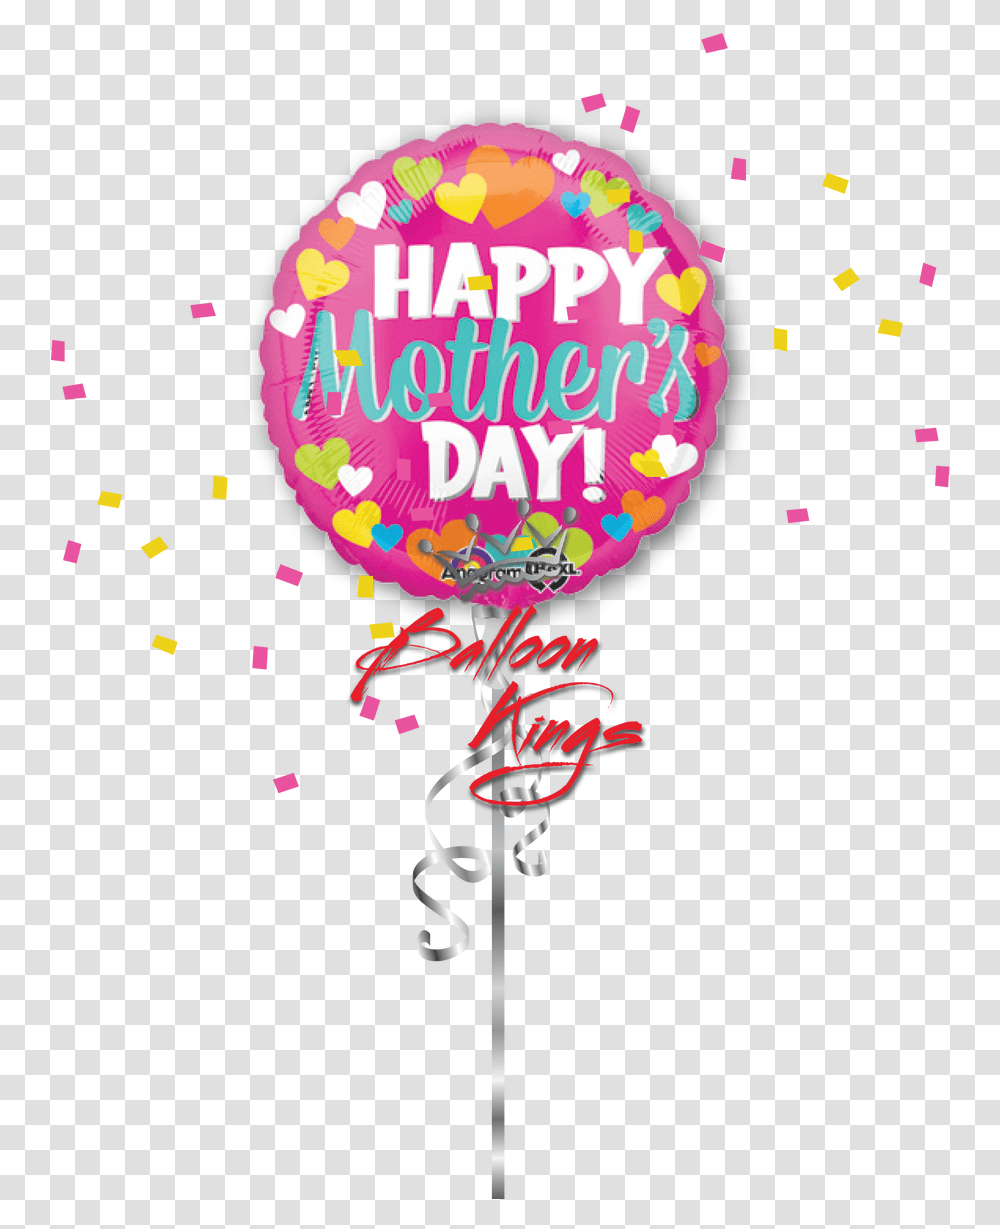 Mother's Day Picsart Editing Background Full Hd, Paper, Confetti, Balloon, Poster Transparent Png